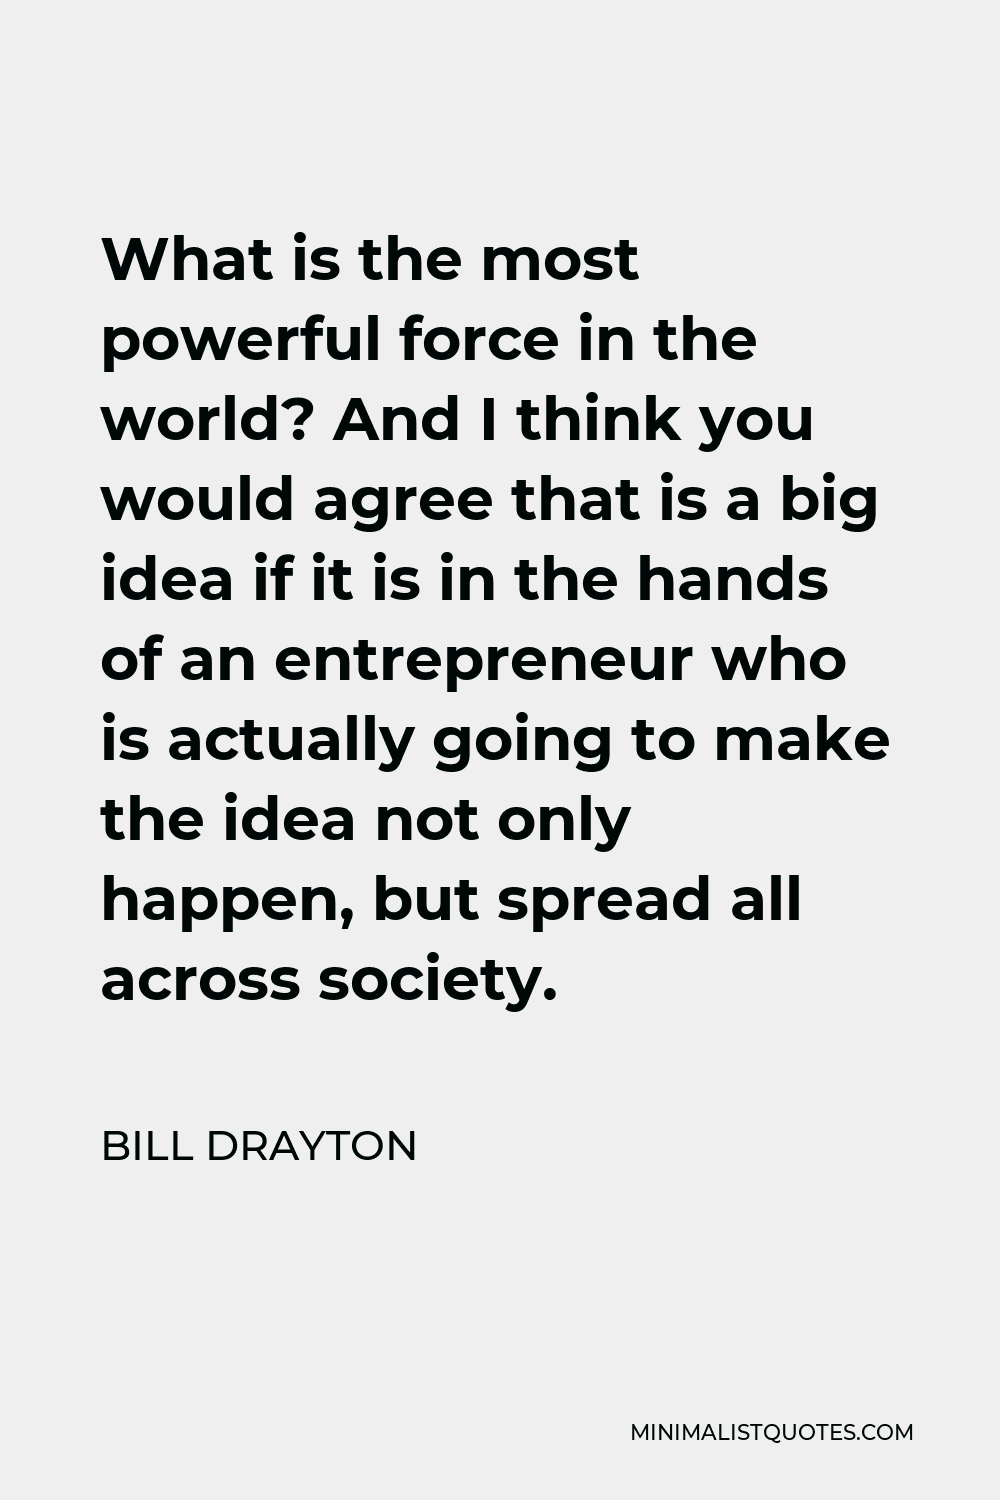 Bill Drayton Quote - What is the most powerful force in the world? And I think you would agree that is a big idea if it is in the hands of an entrepreneur who is actually going to make the idea not only happen, but spread all across society.